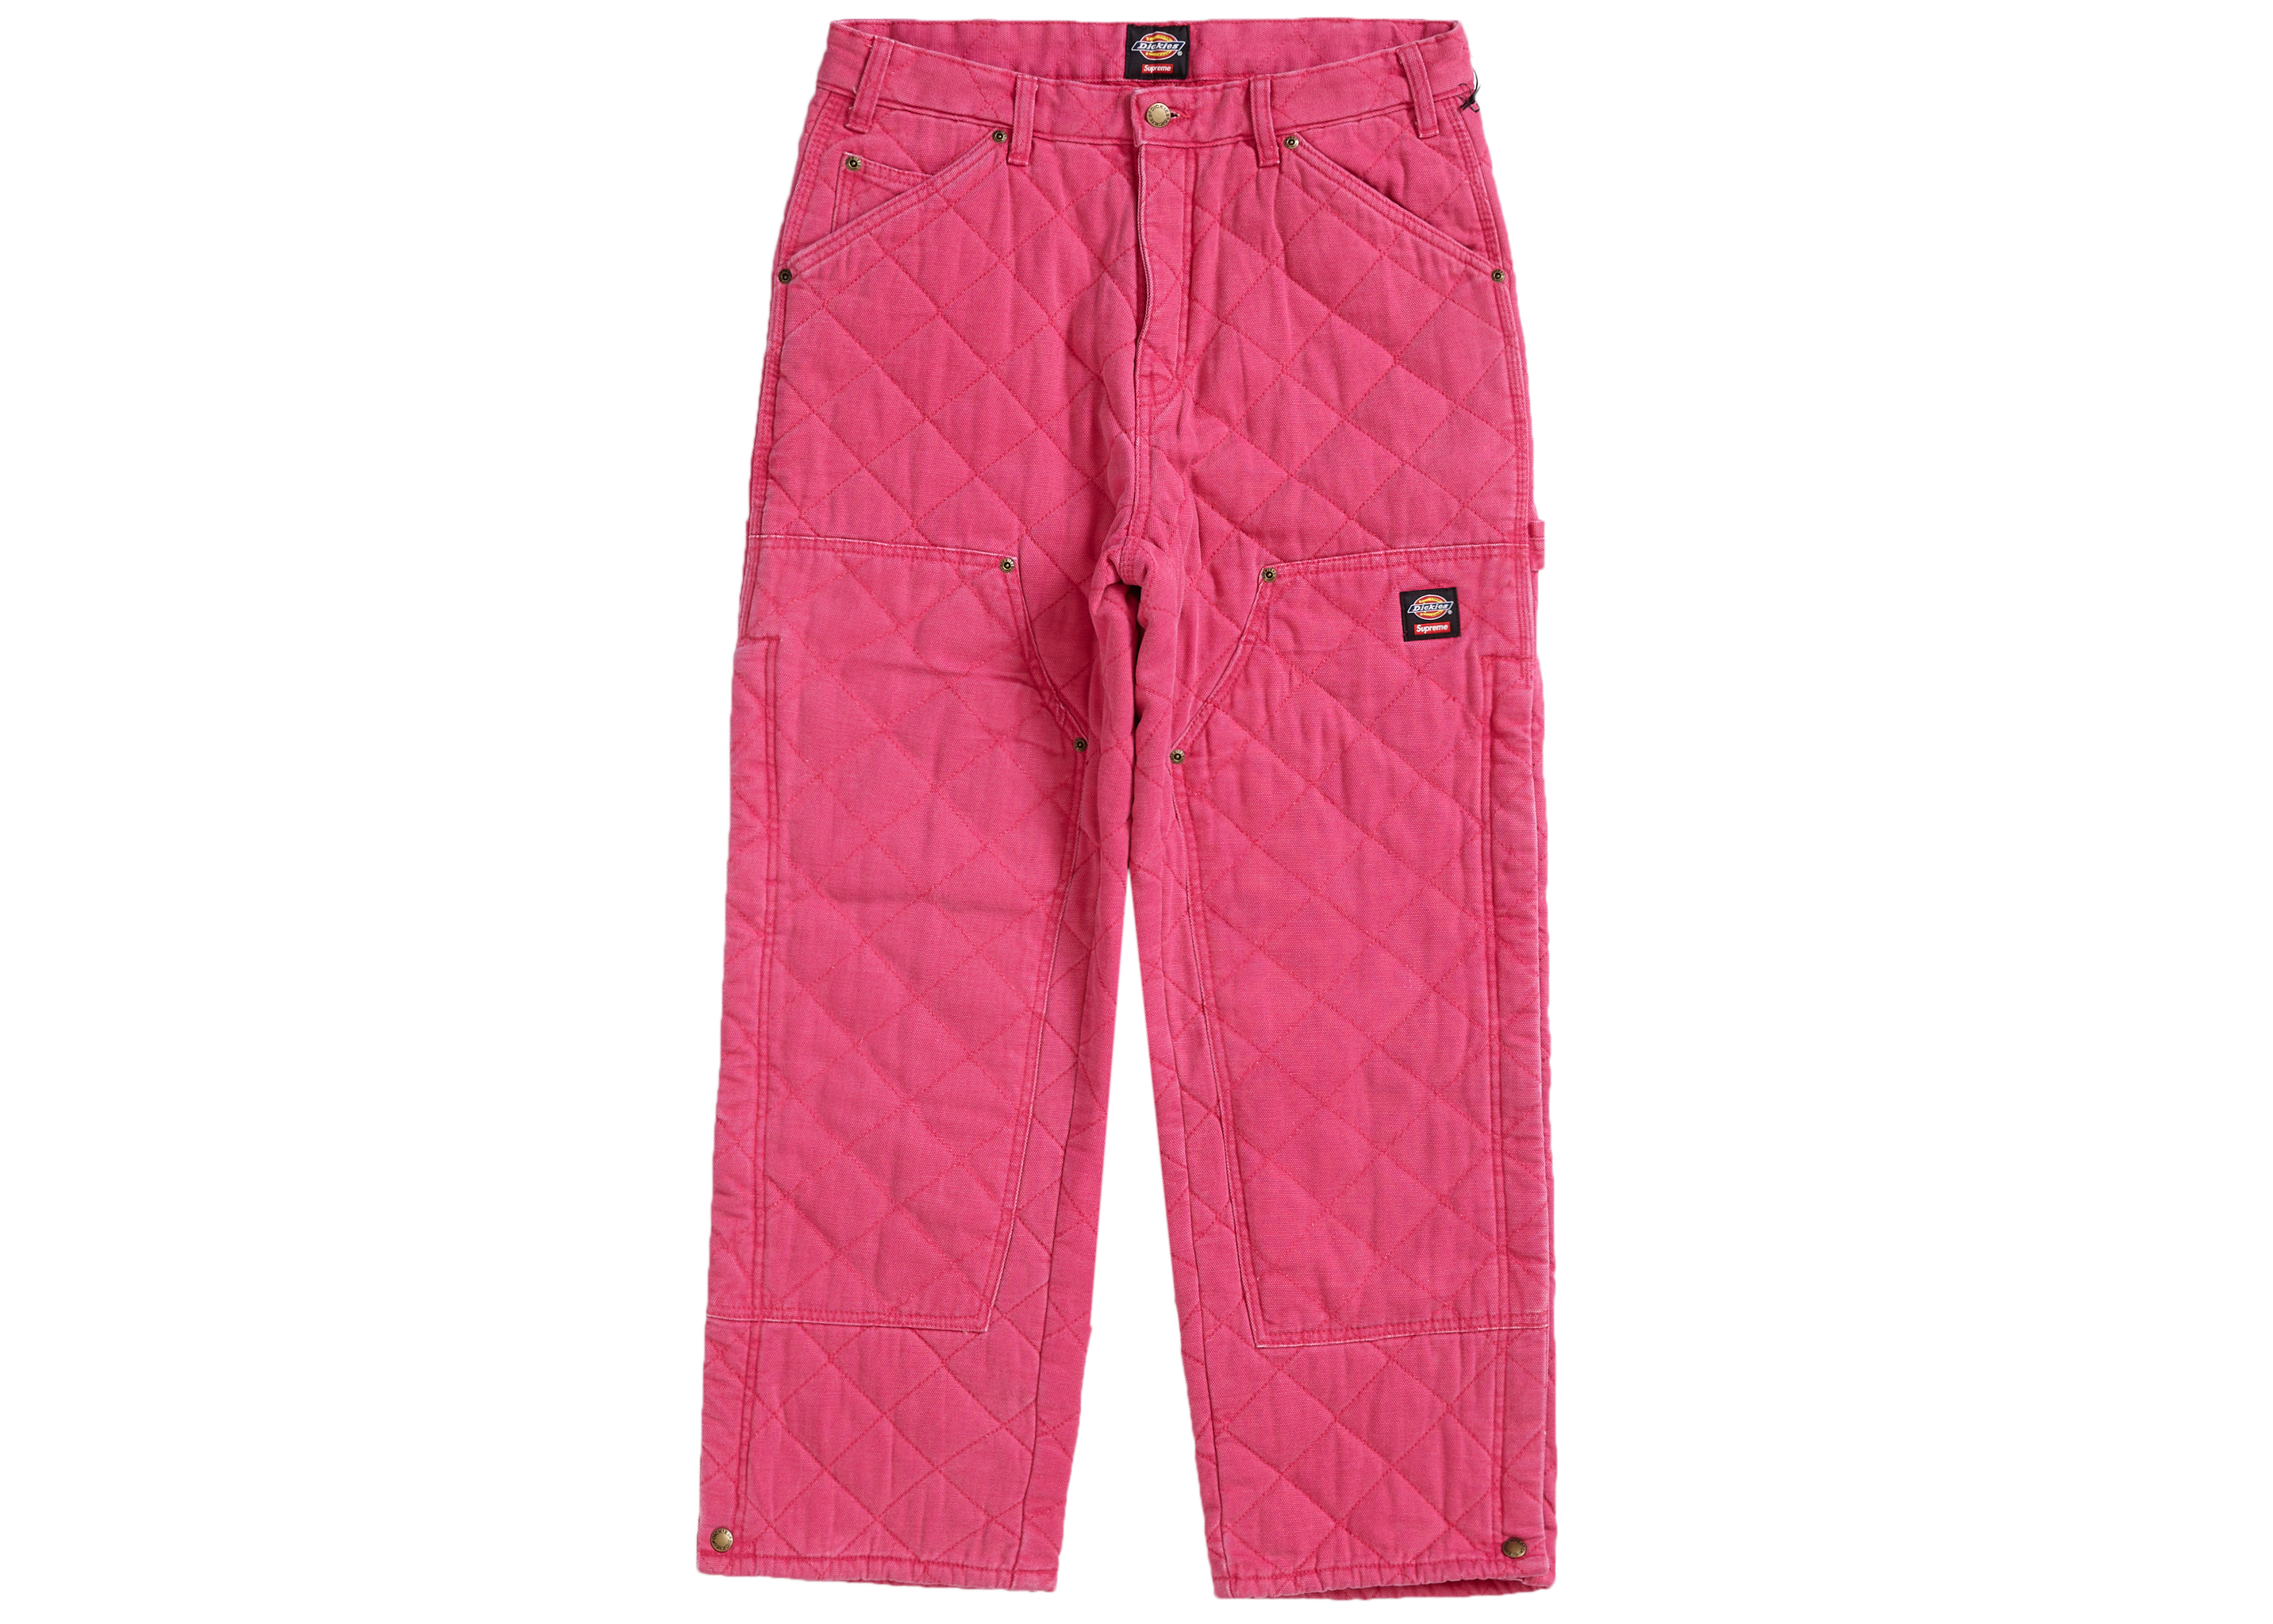 Supreme Dickies Quilted Double Knee Painter Pant Pink - FW21 Men's